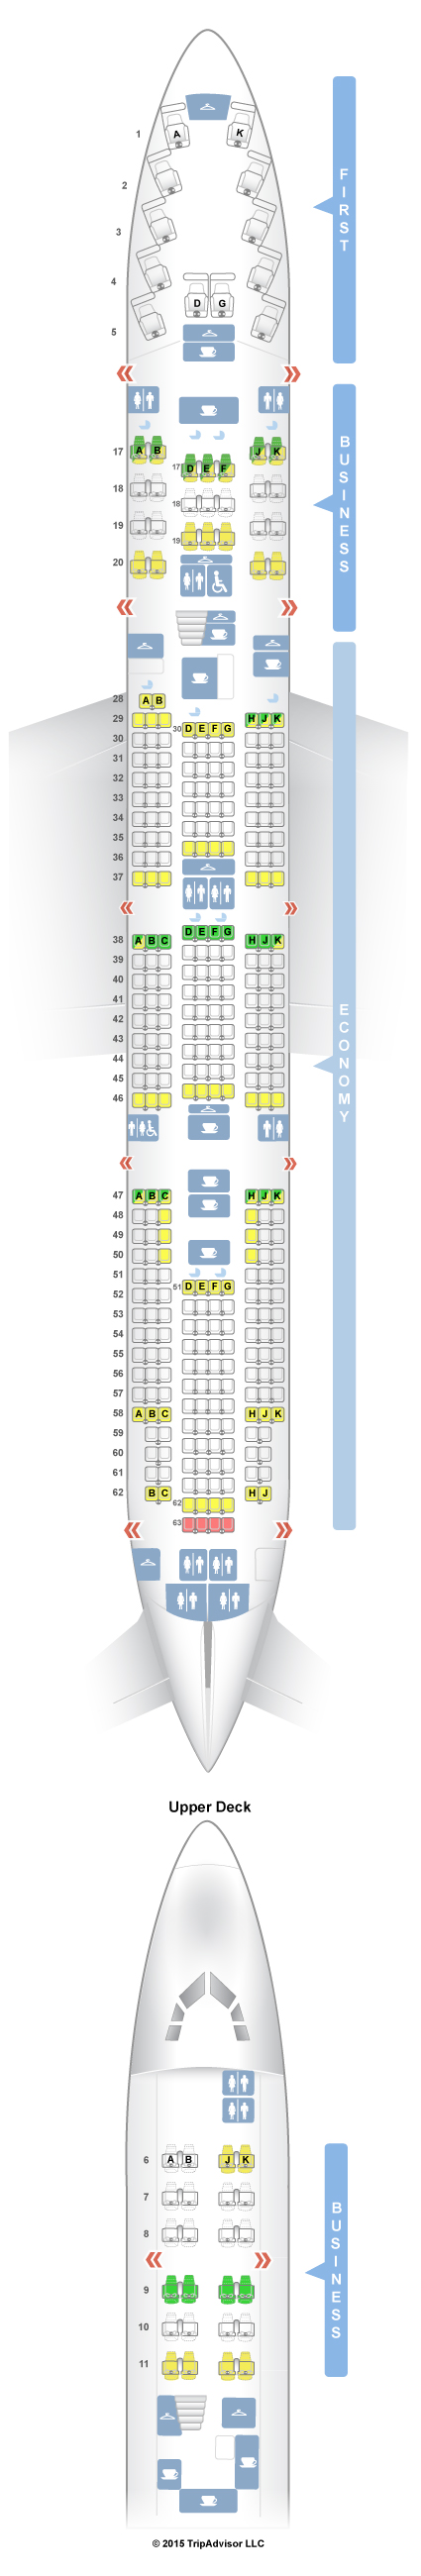 United Airlines Boeing 747 Seating Chart